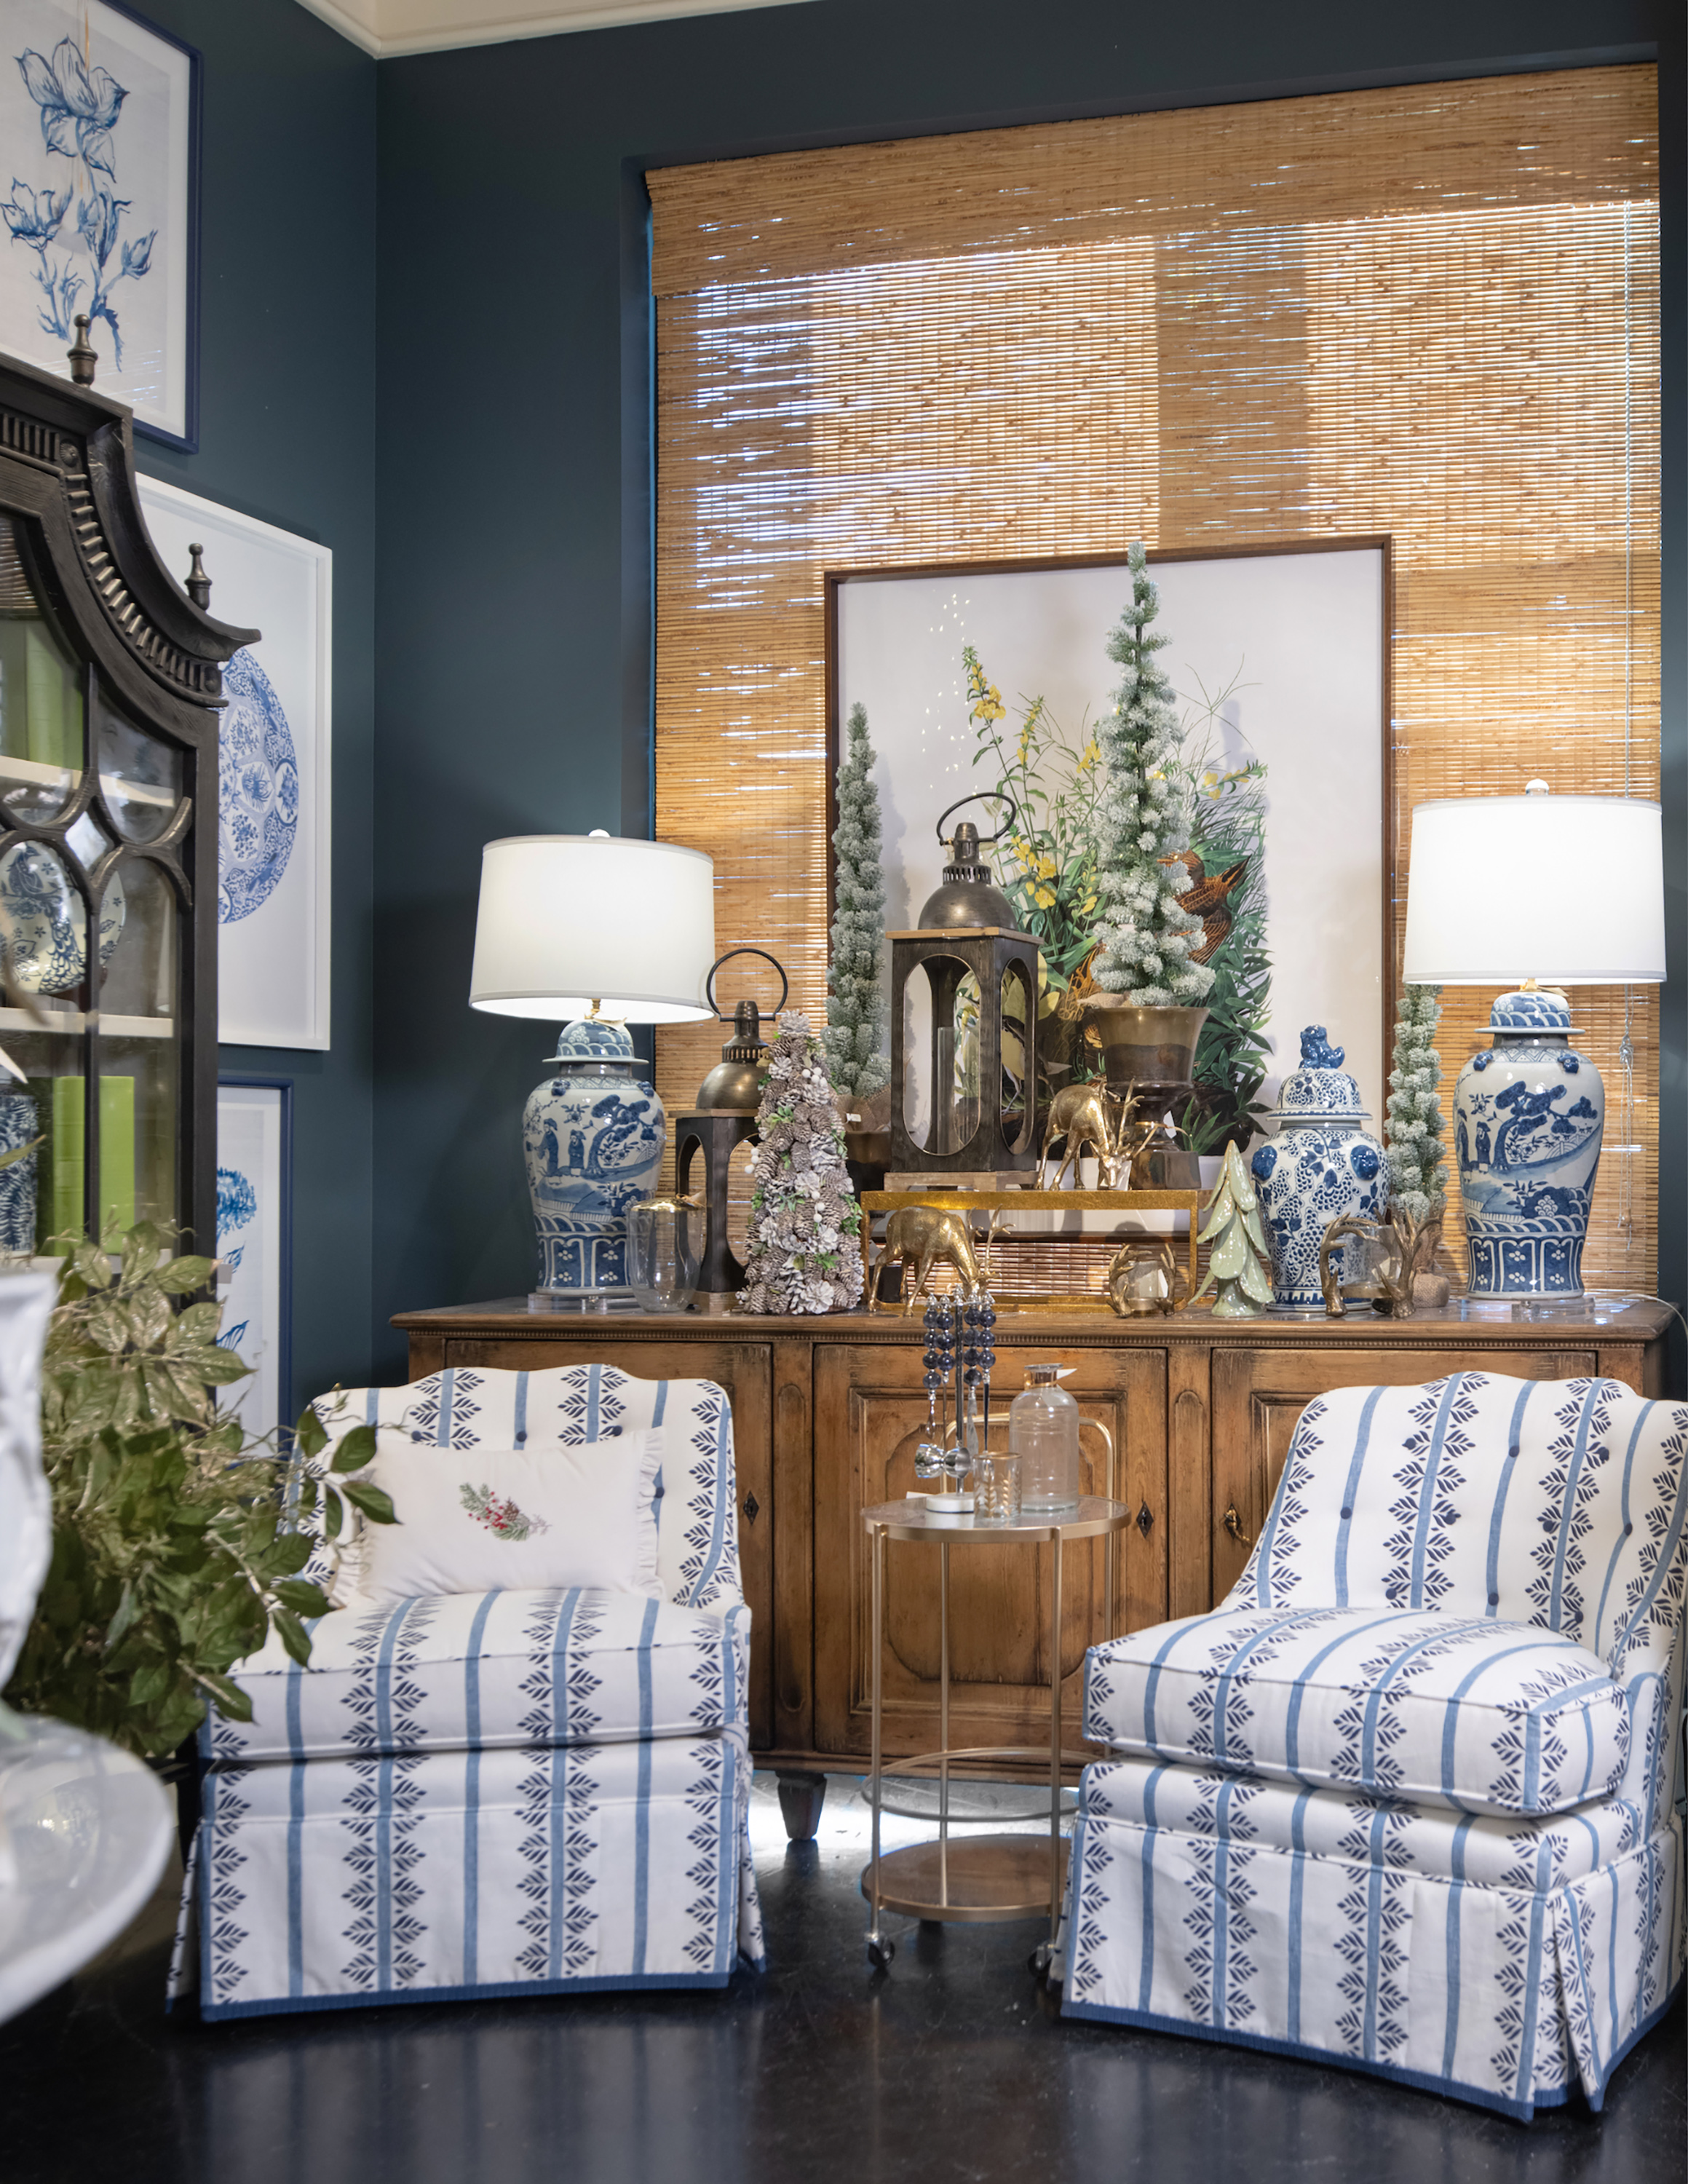 Twin lamps frame a sideboard, adding to the blue and white motif. 